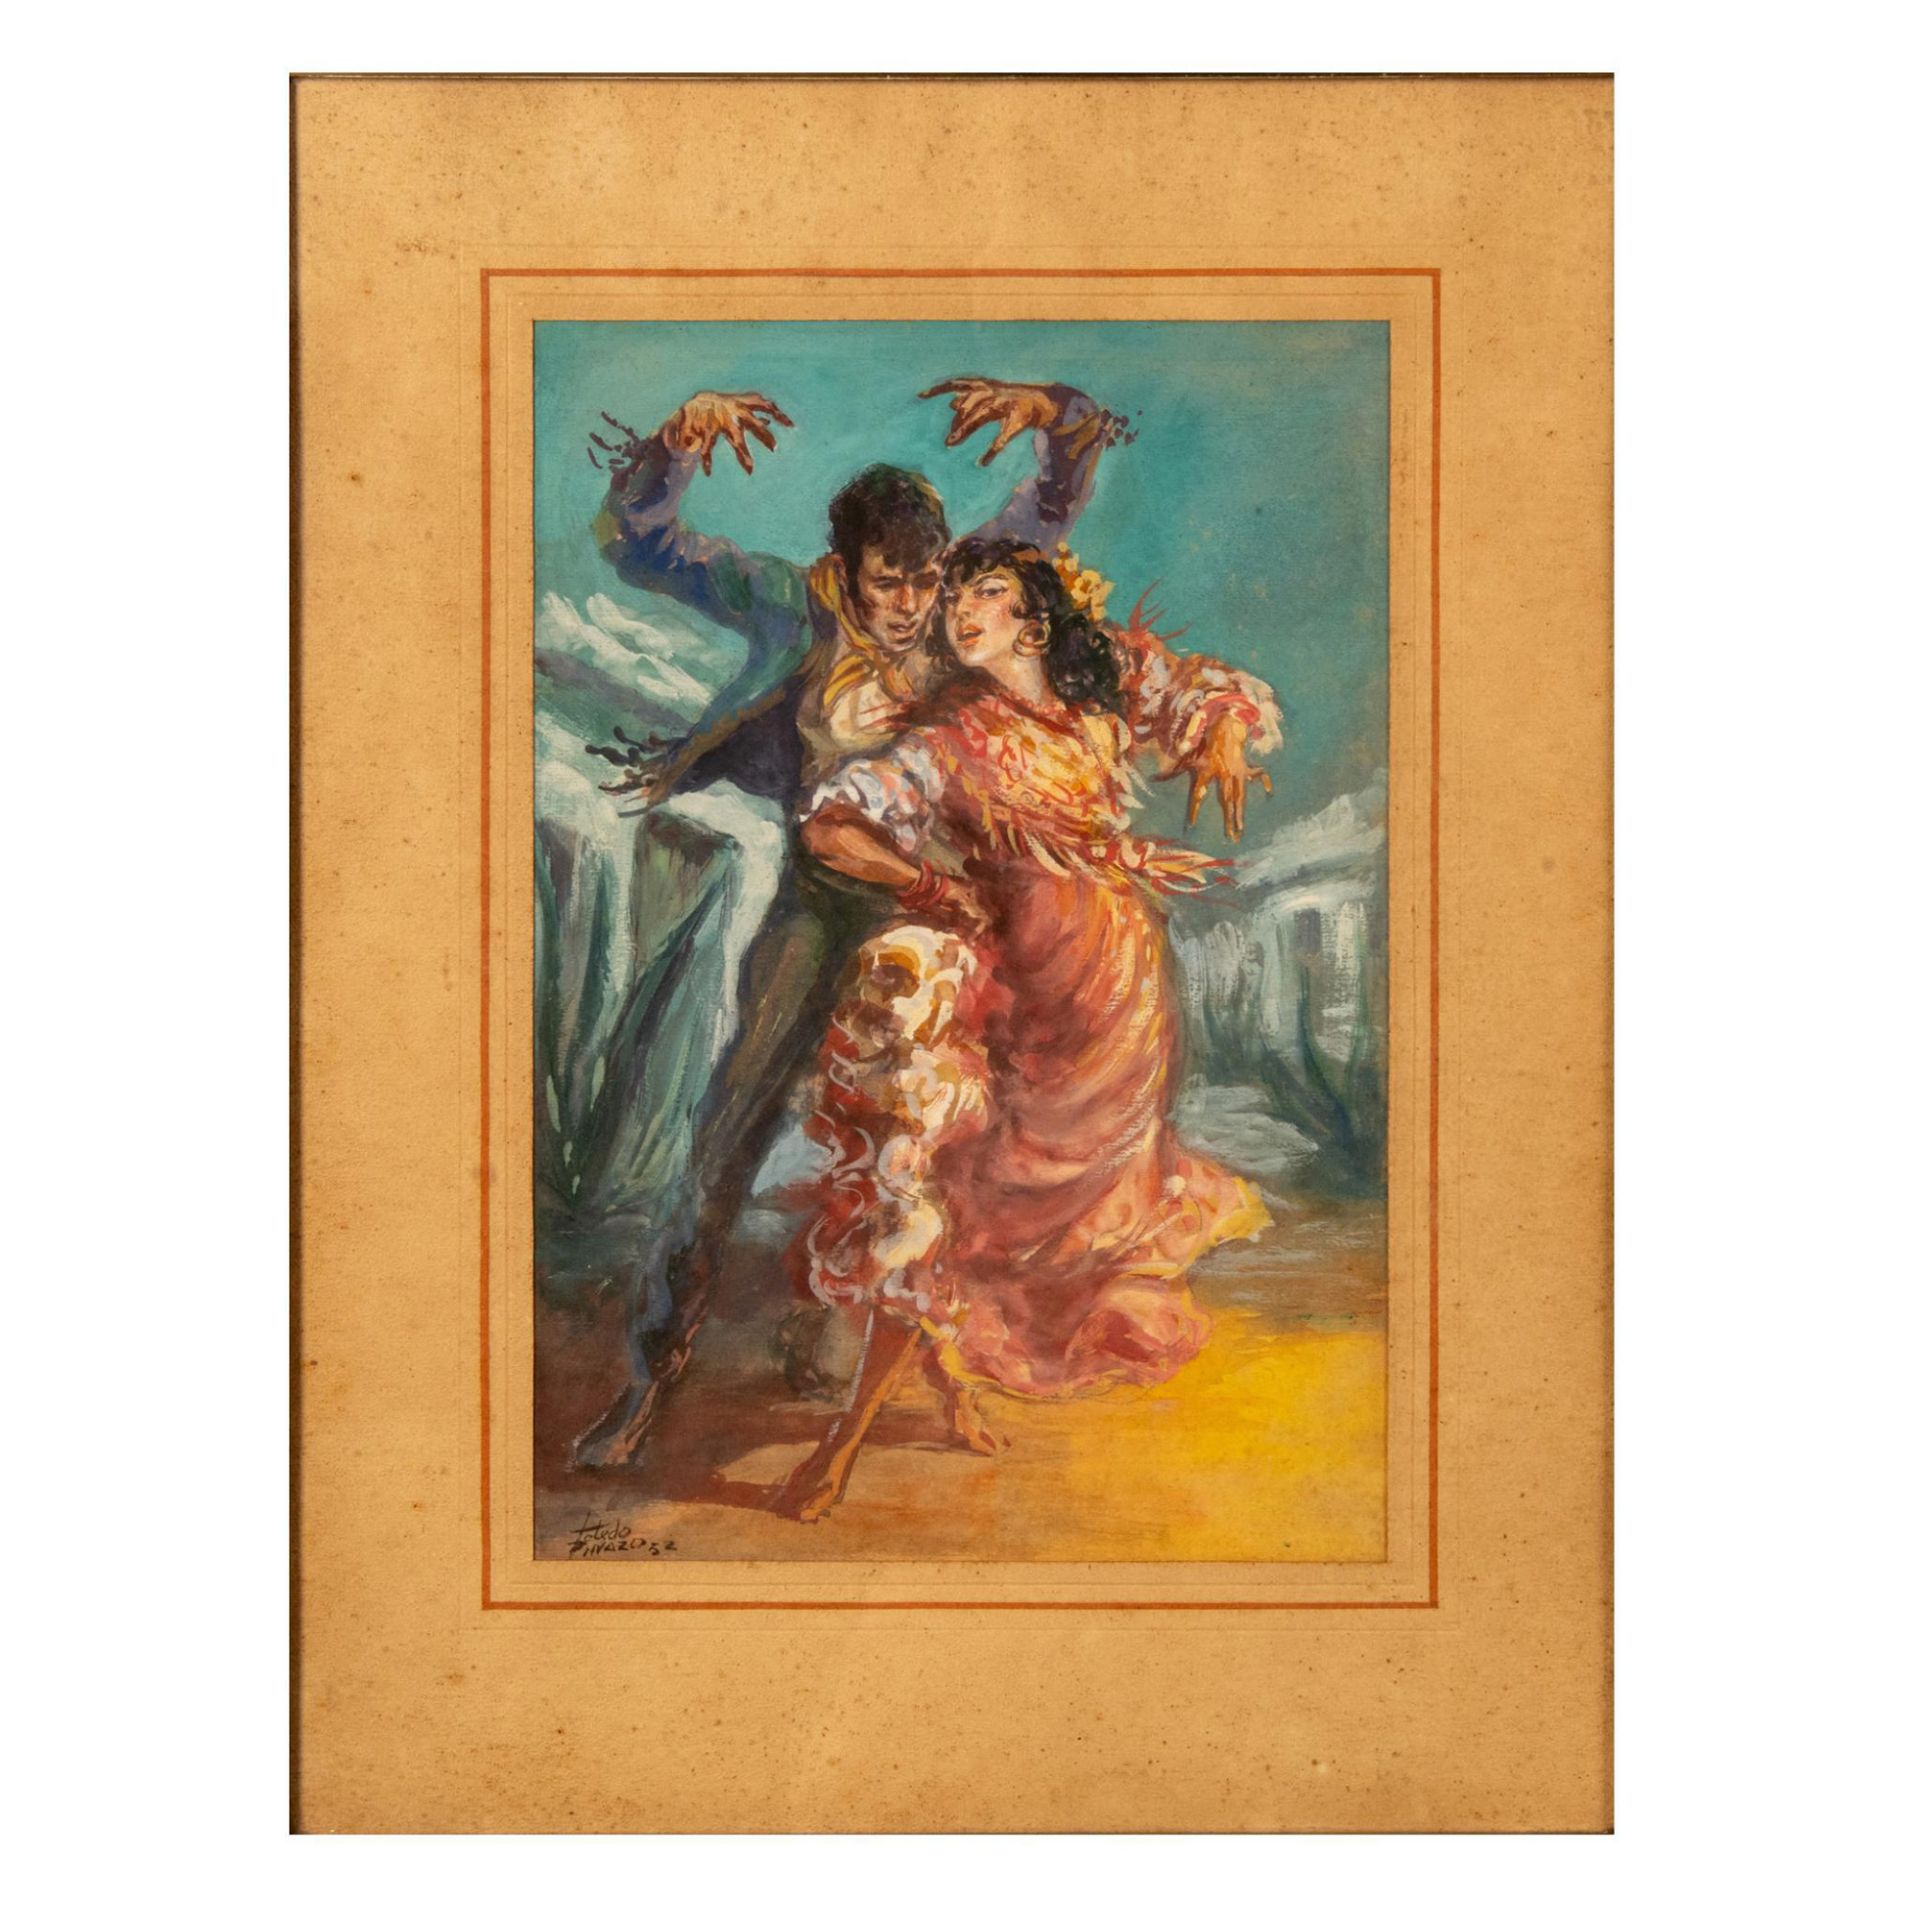 Original Watercolor and Gouache on Paper, Flamenco, Signed - Image 2 of 5